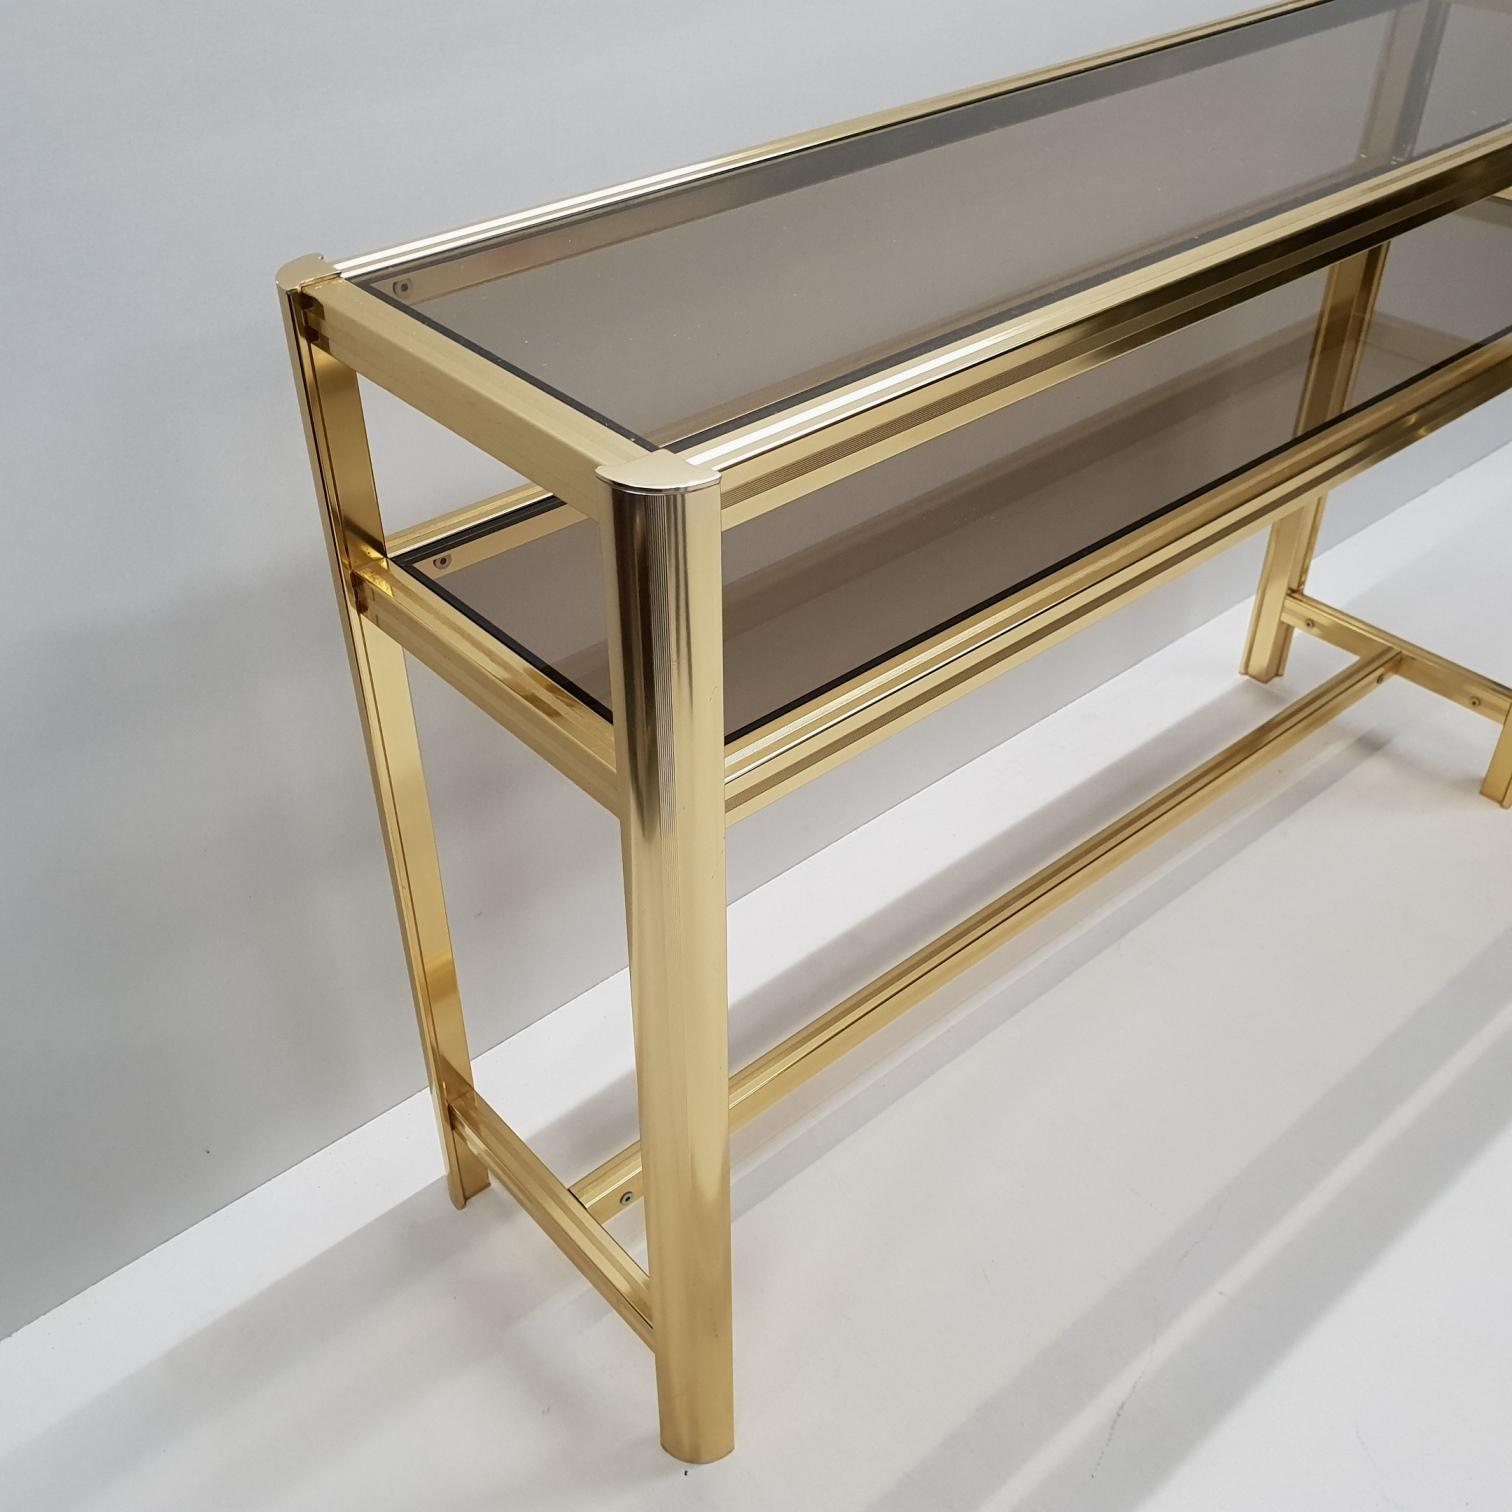 Hollywood Regency Italian Modern Gilt Brass Two Tiers Side Table with Smoked Glass, 1980s For Sale